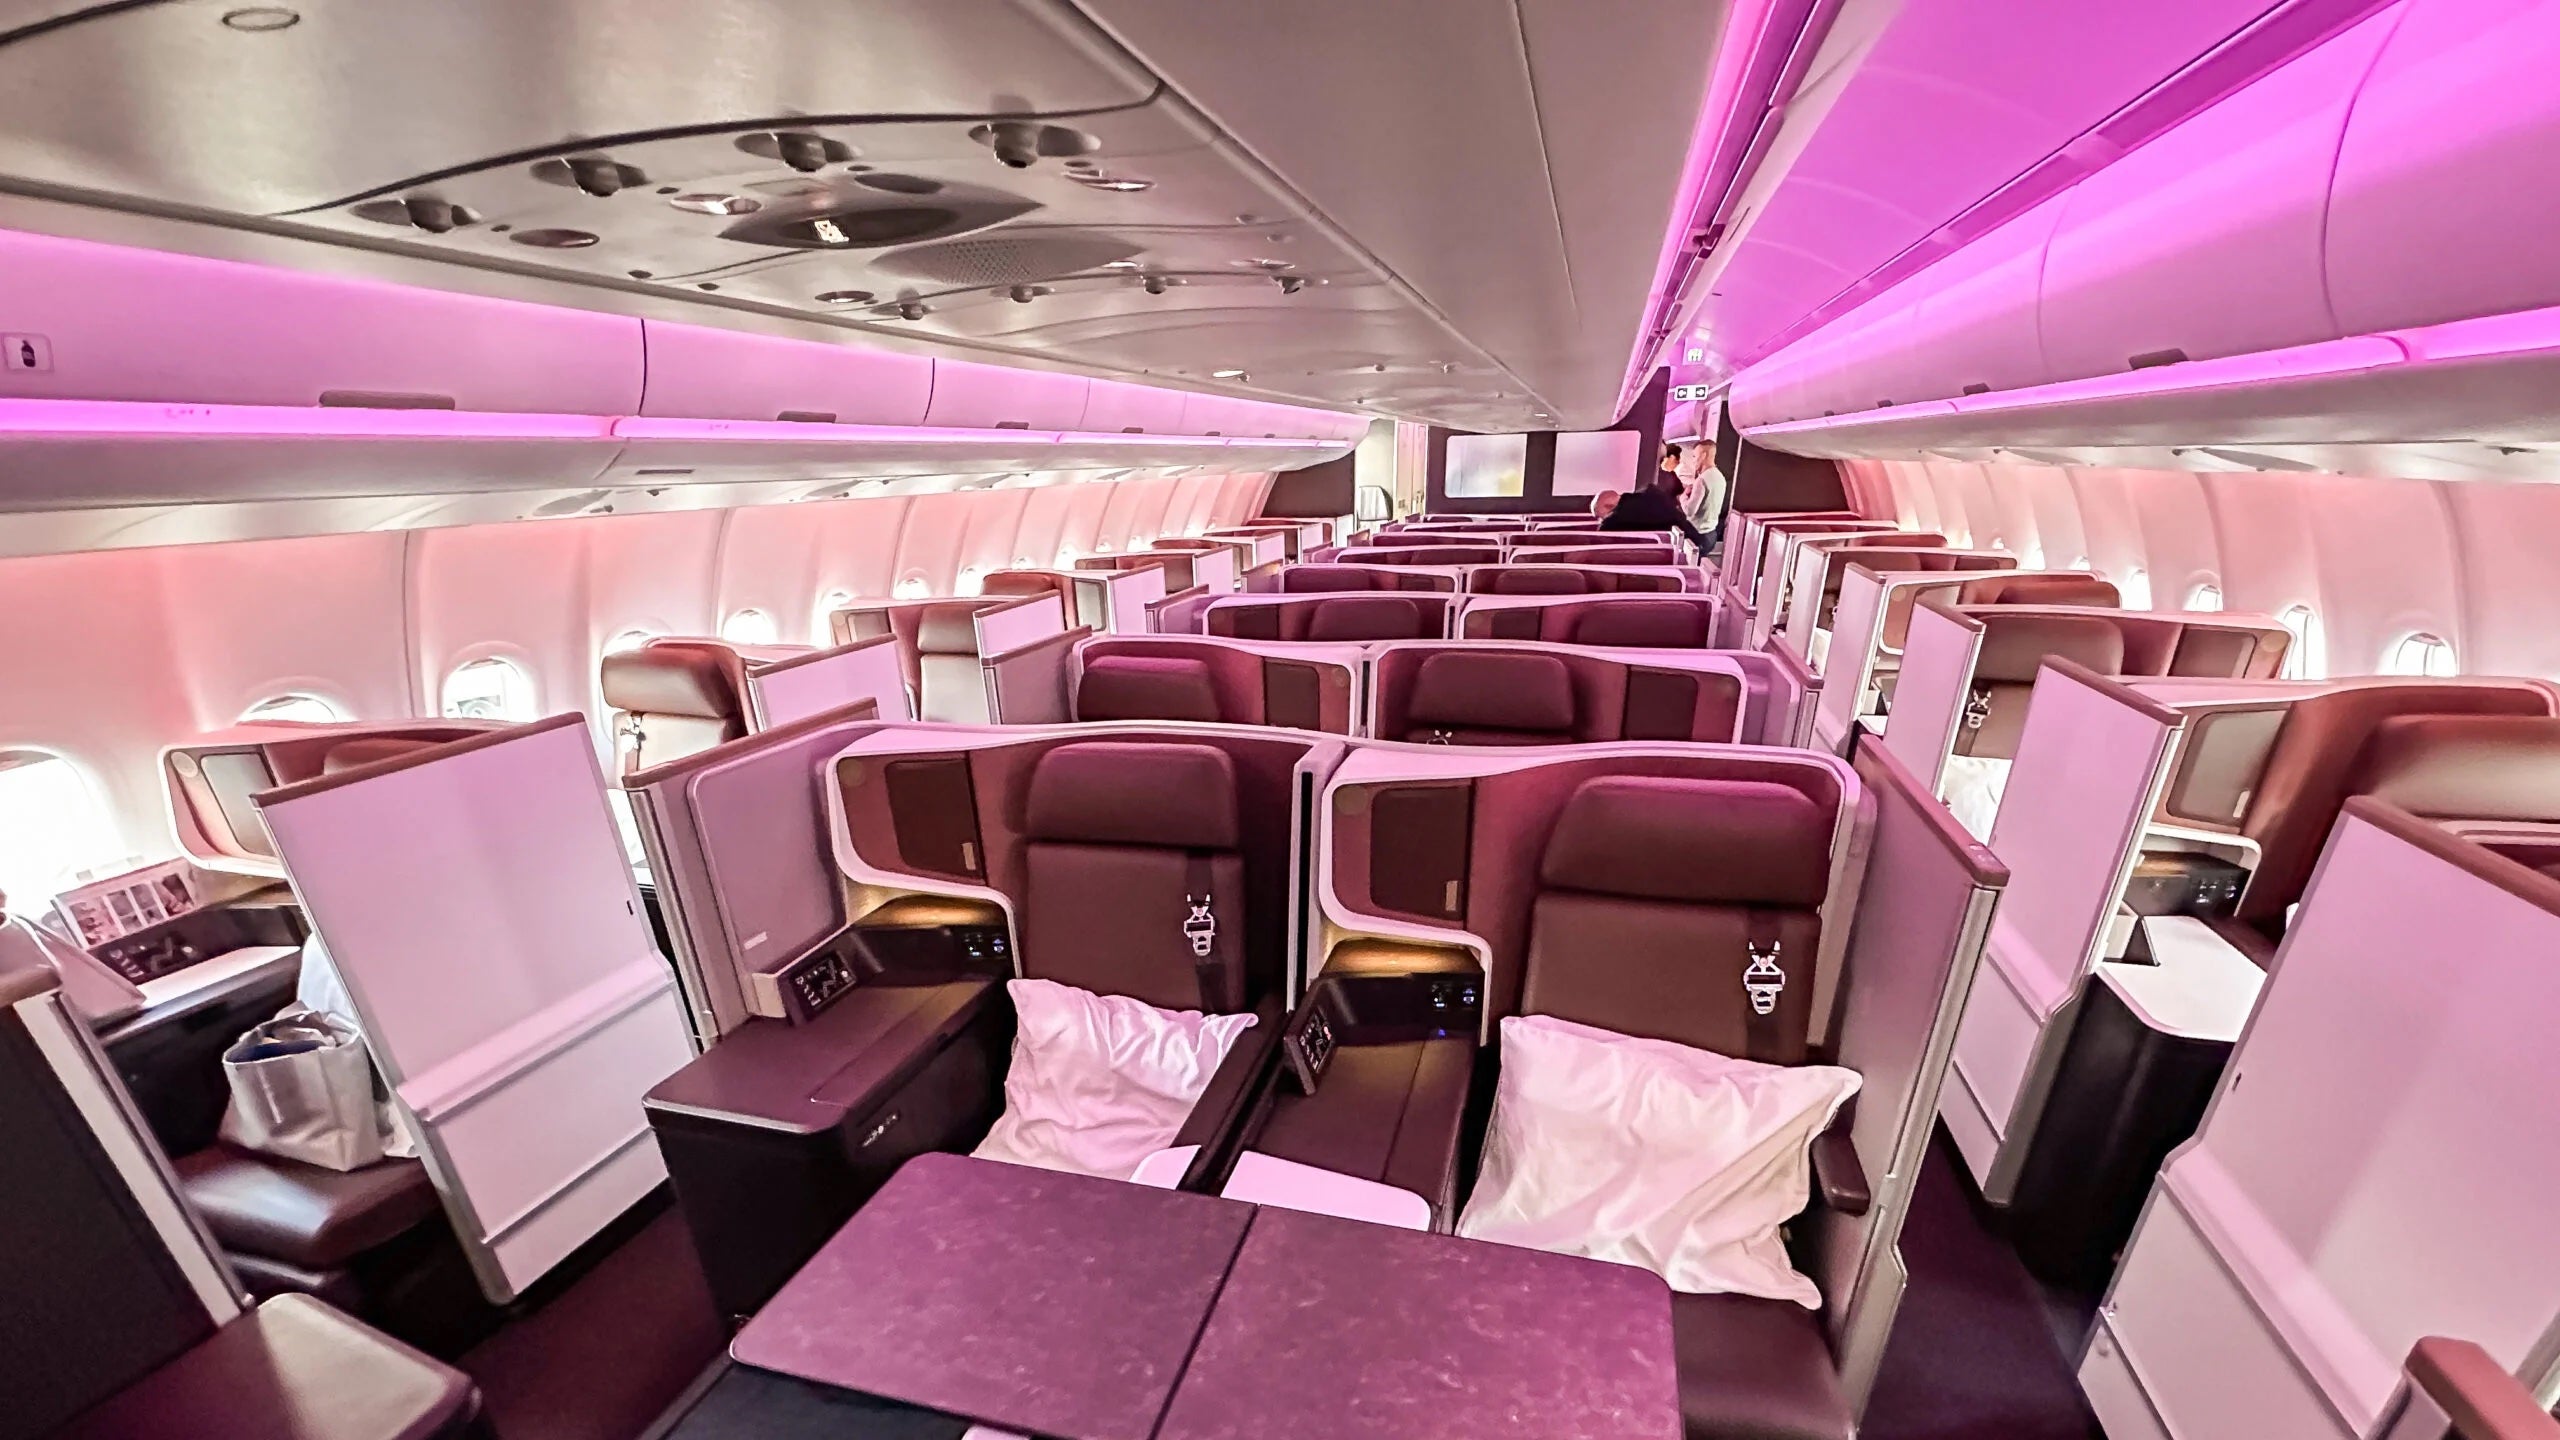 Onboard Virgin Atlantic’s first-ever A330-900neo commercial flight